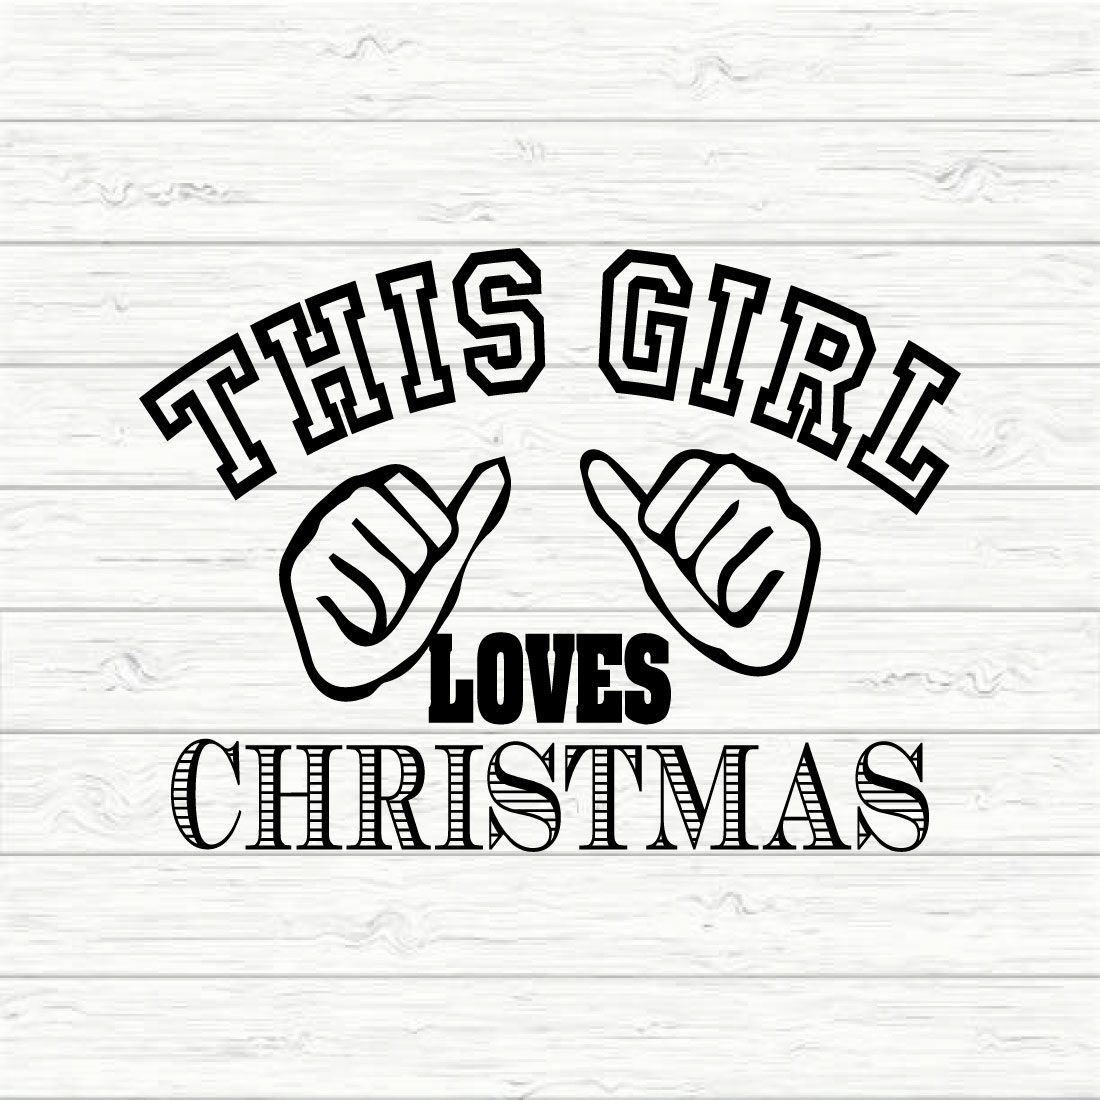 This Girl Loves Christmas cover image.